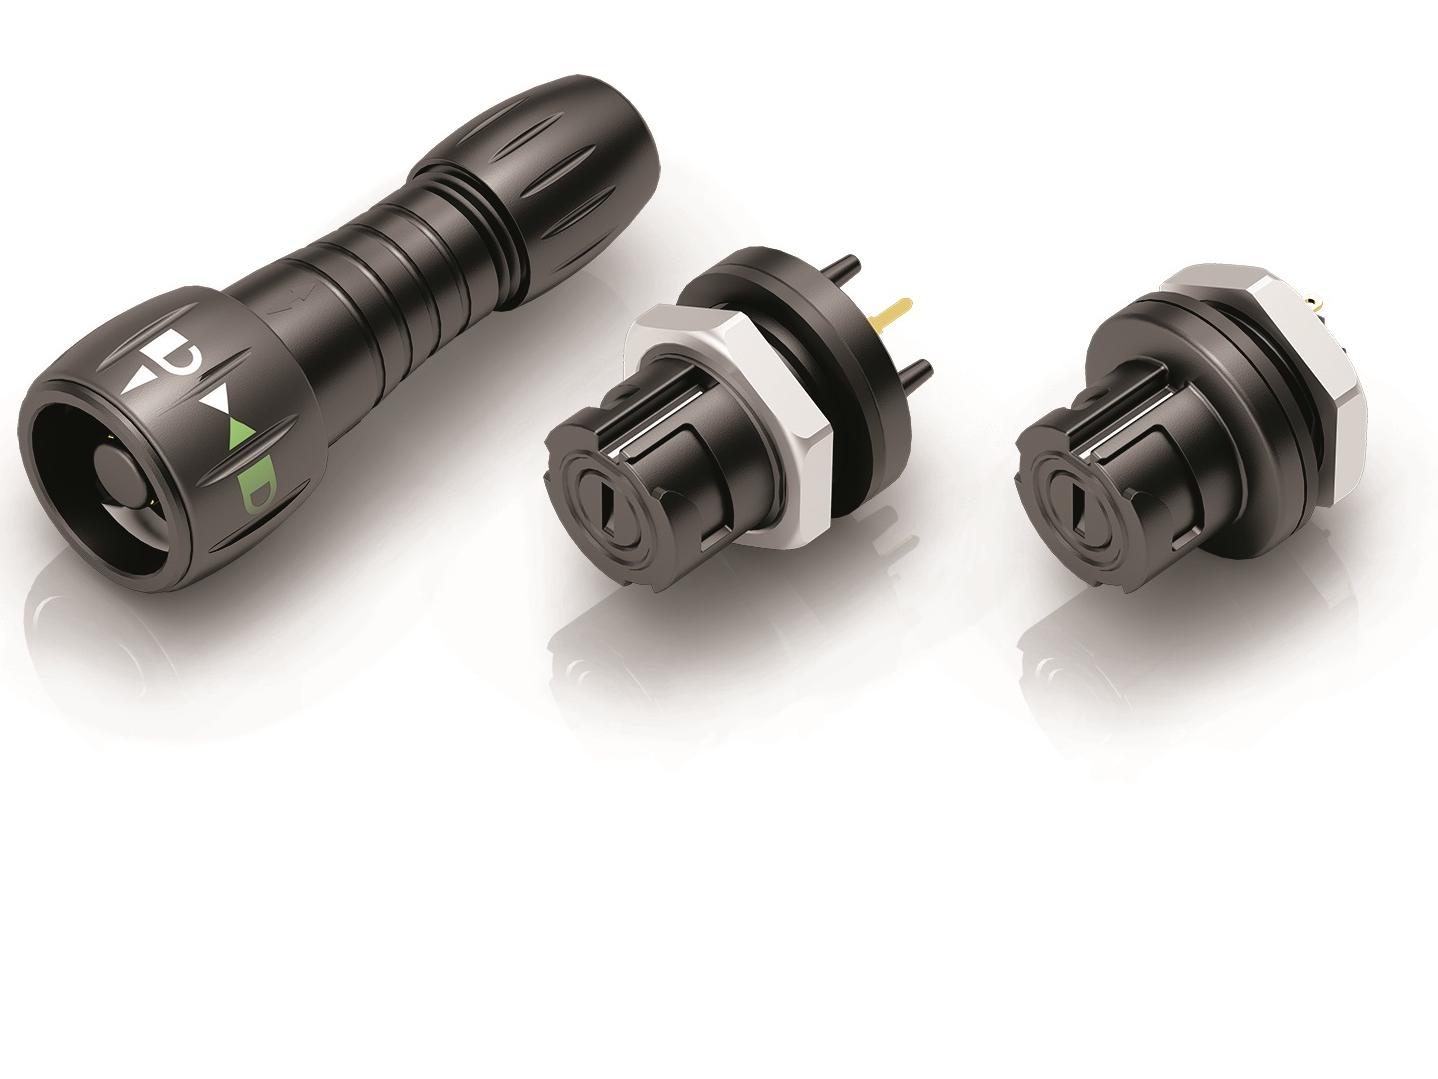 NCC Connectors suit applications with restricted space 

